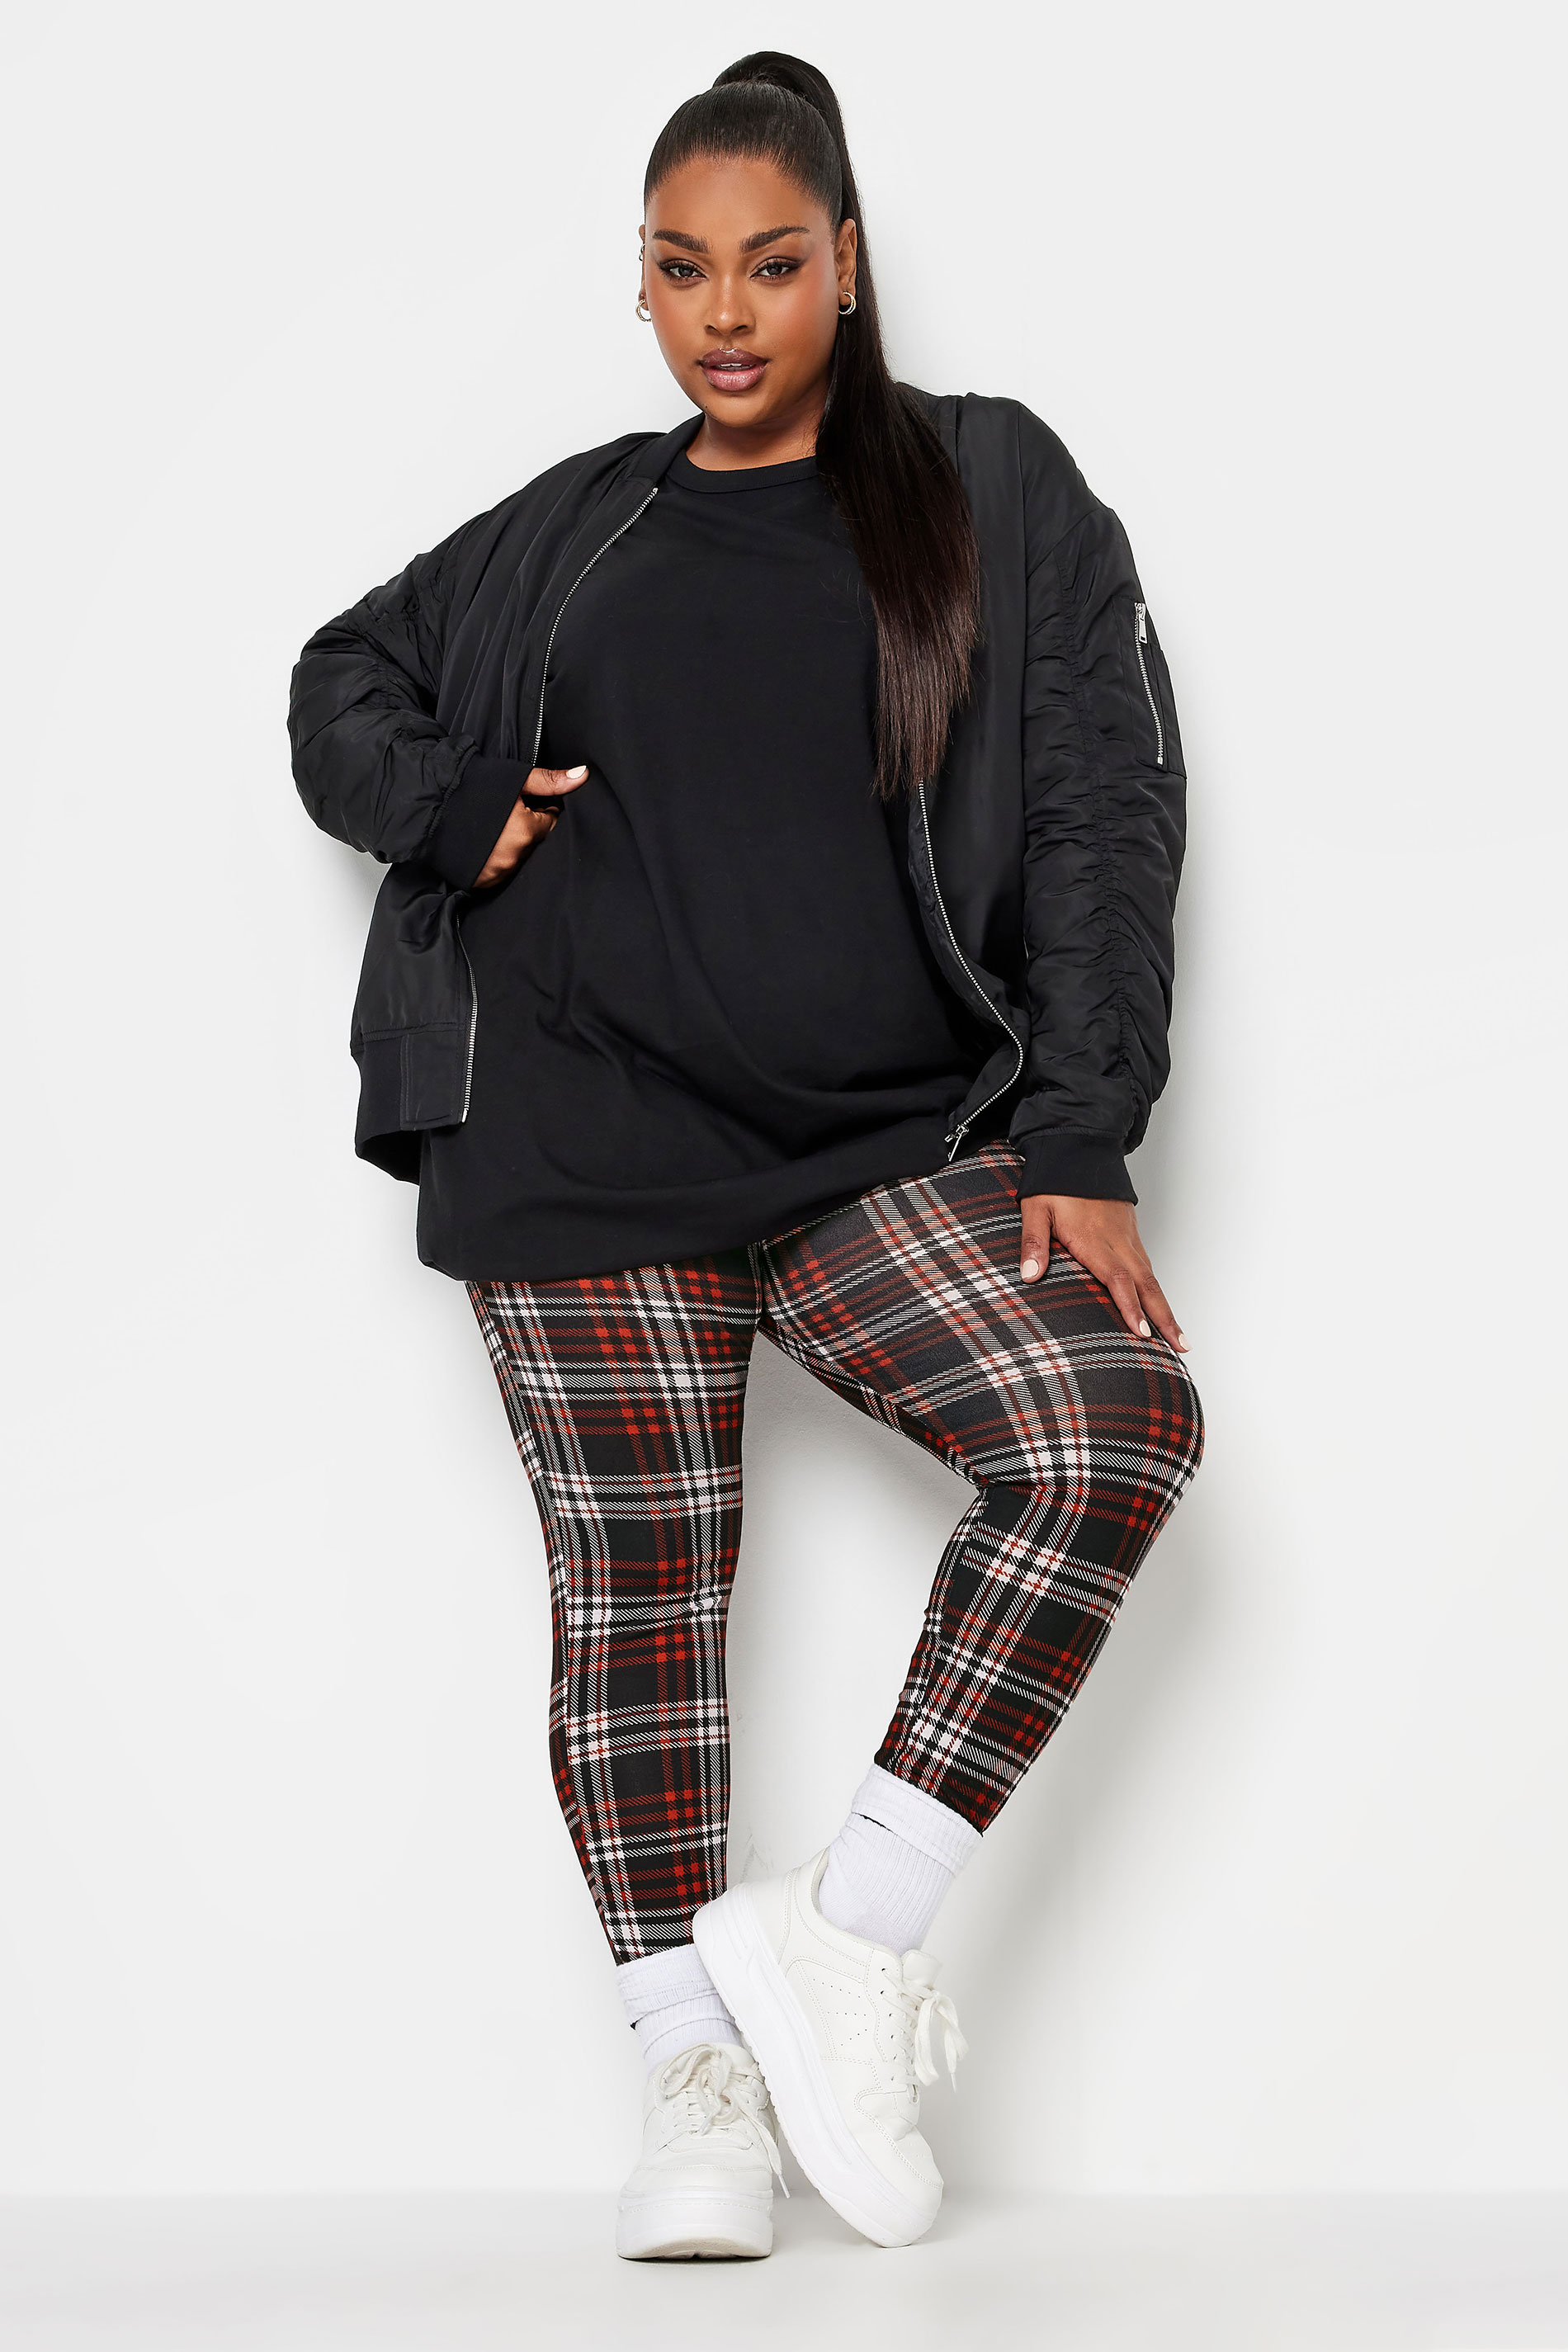 Top more than 153 checkered leggings plus size super hot